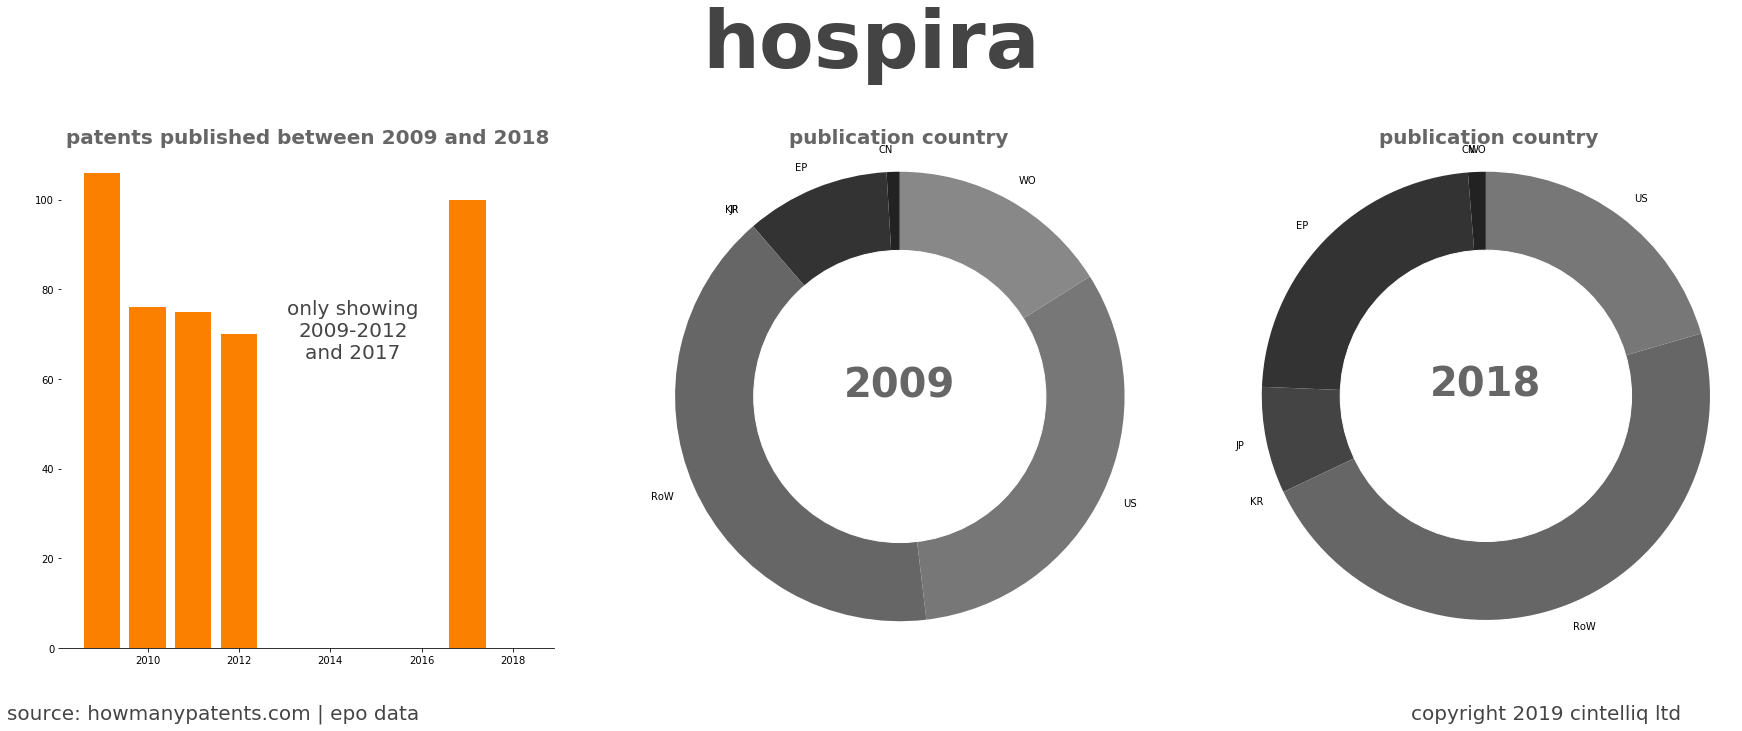 summary of patents for Hospira